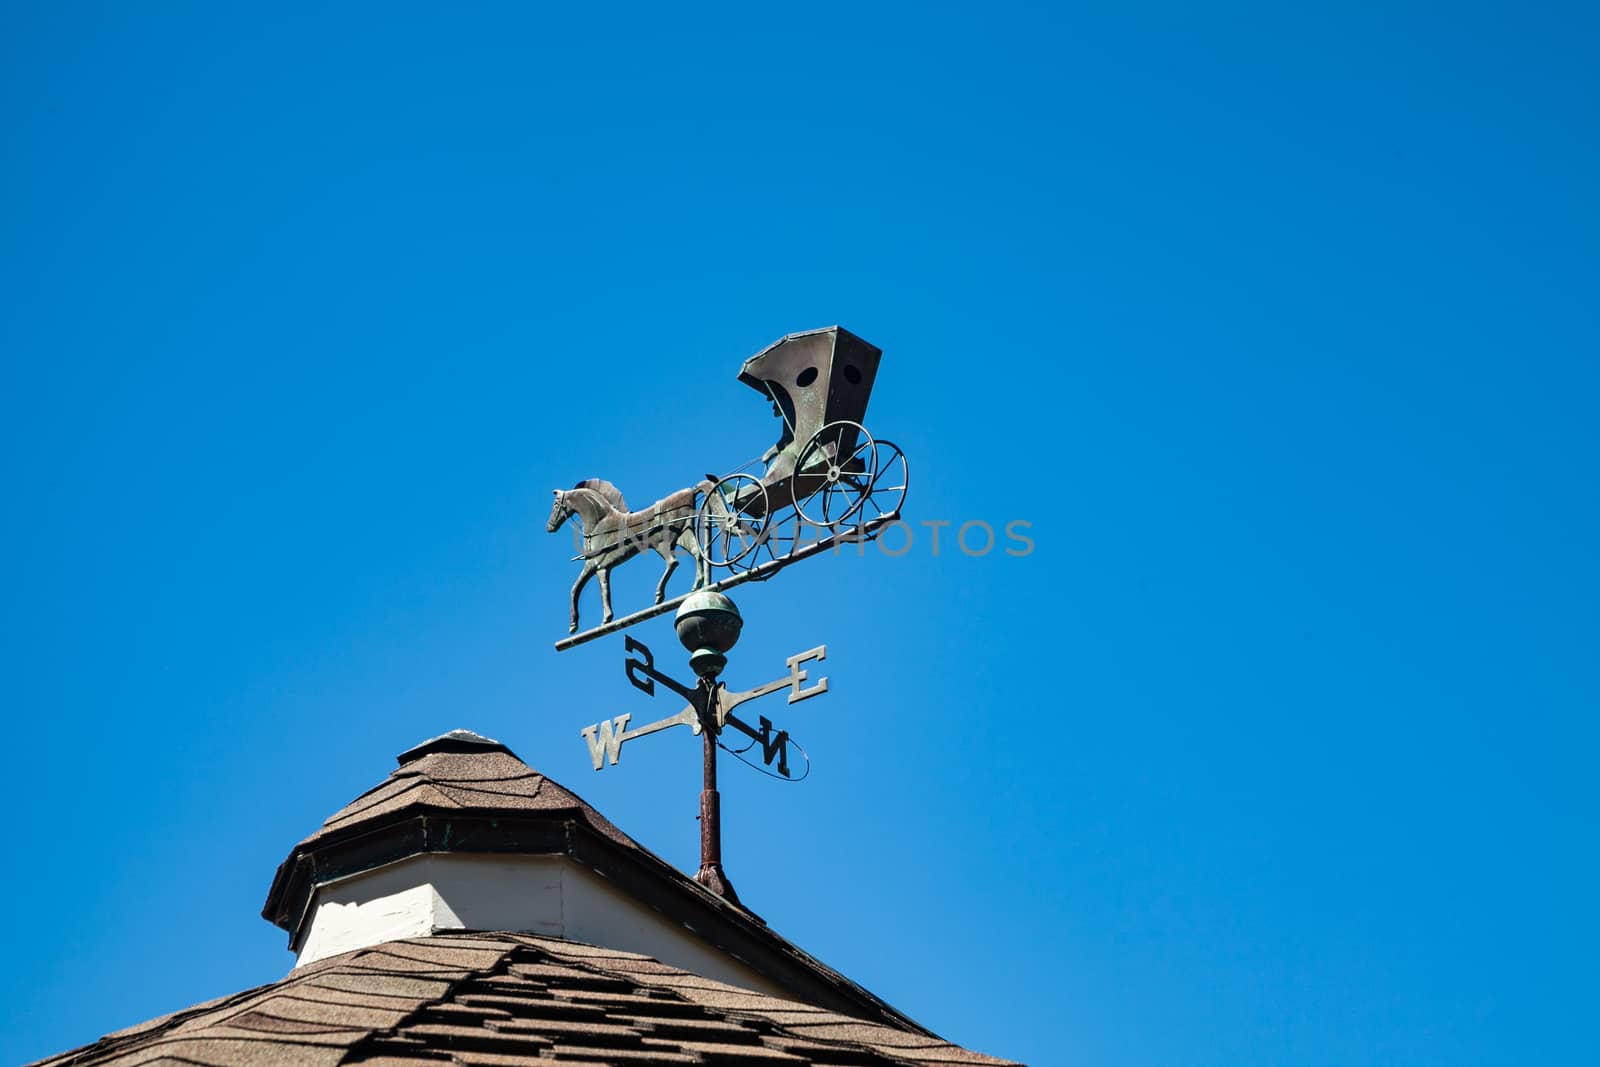 A Weather Vane which has a horse and carriage